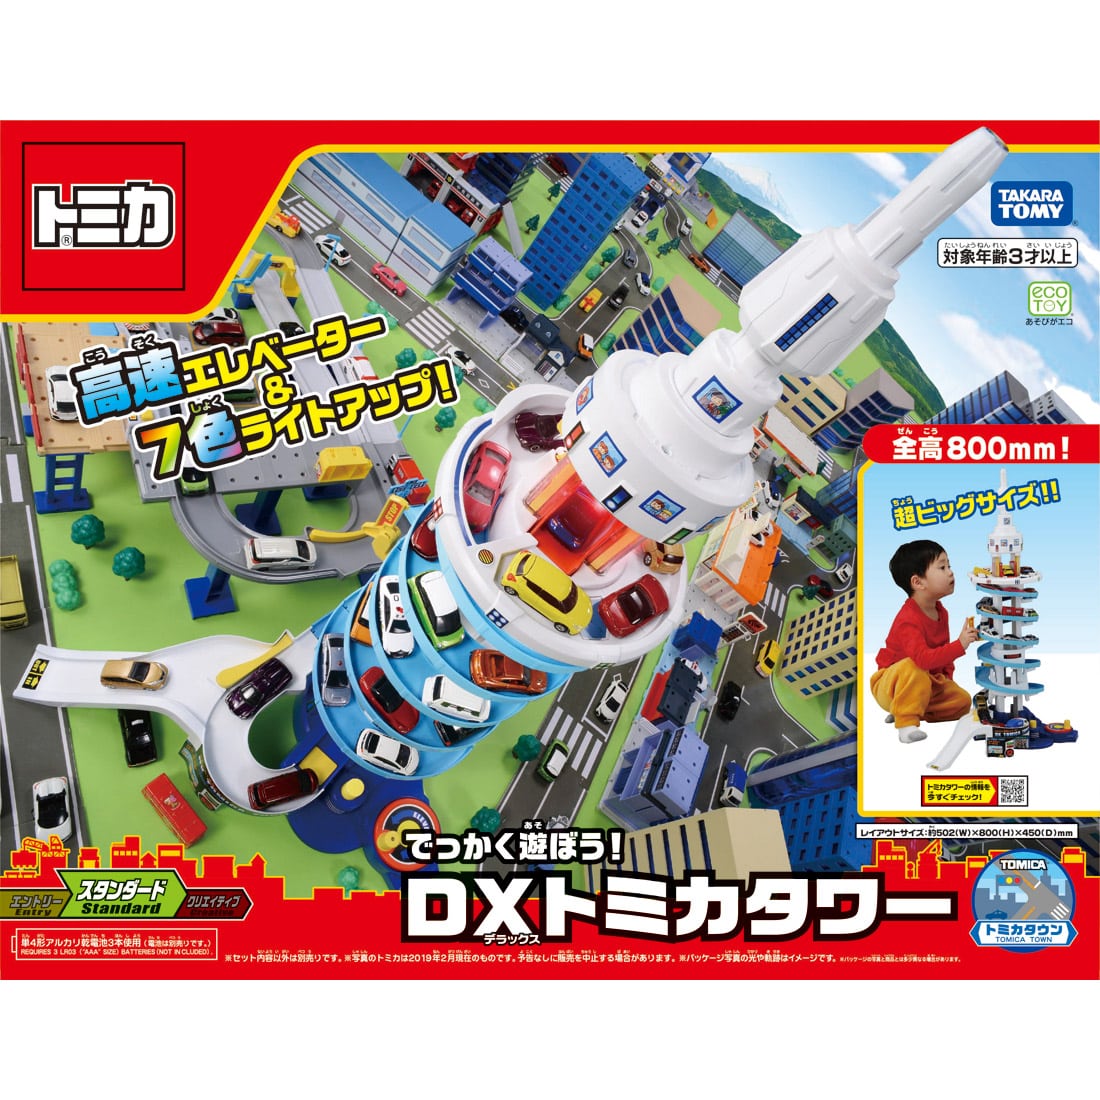 Let's Play Big! DX Tomica Tower (Toy) | Tomica Wiki | Fandom